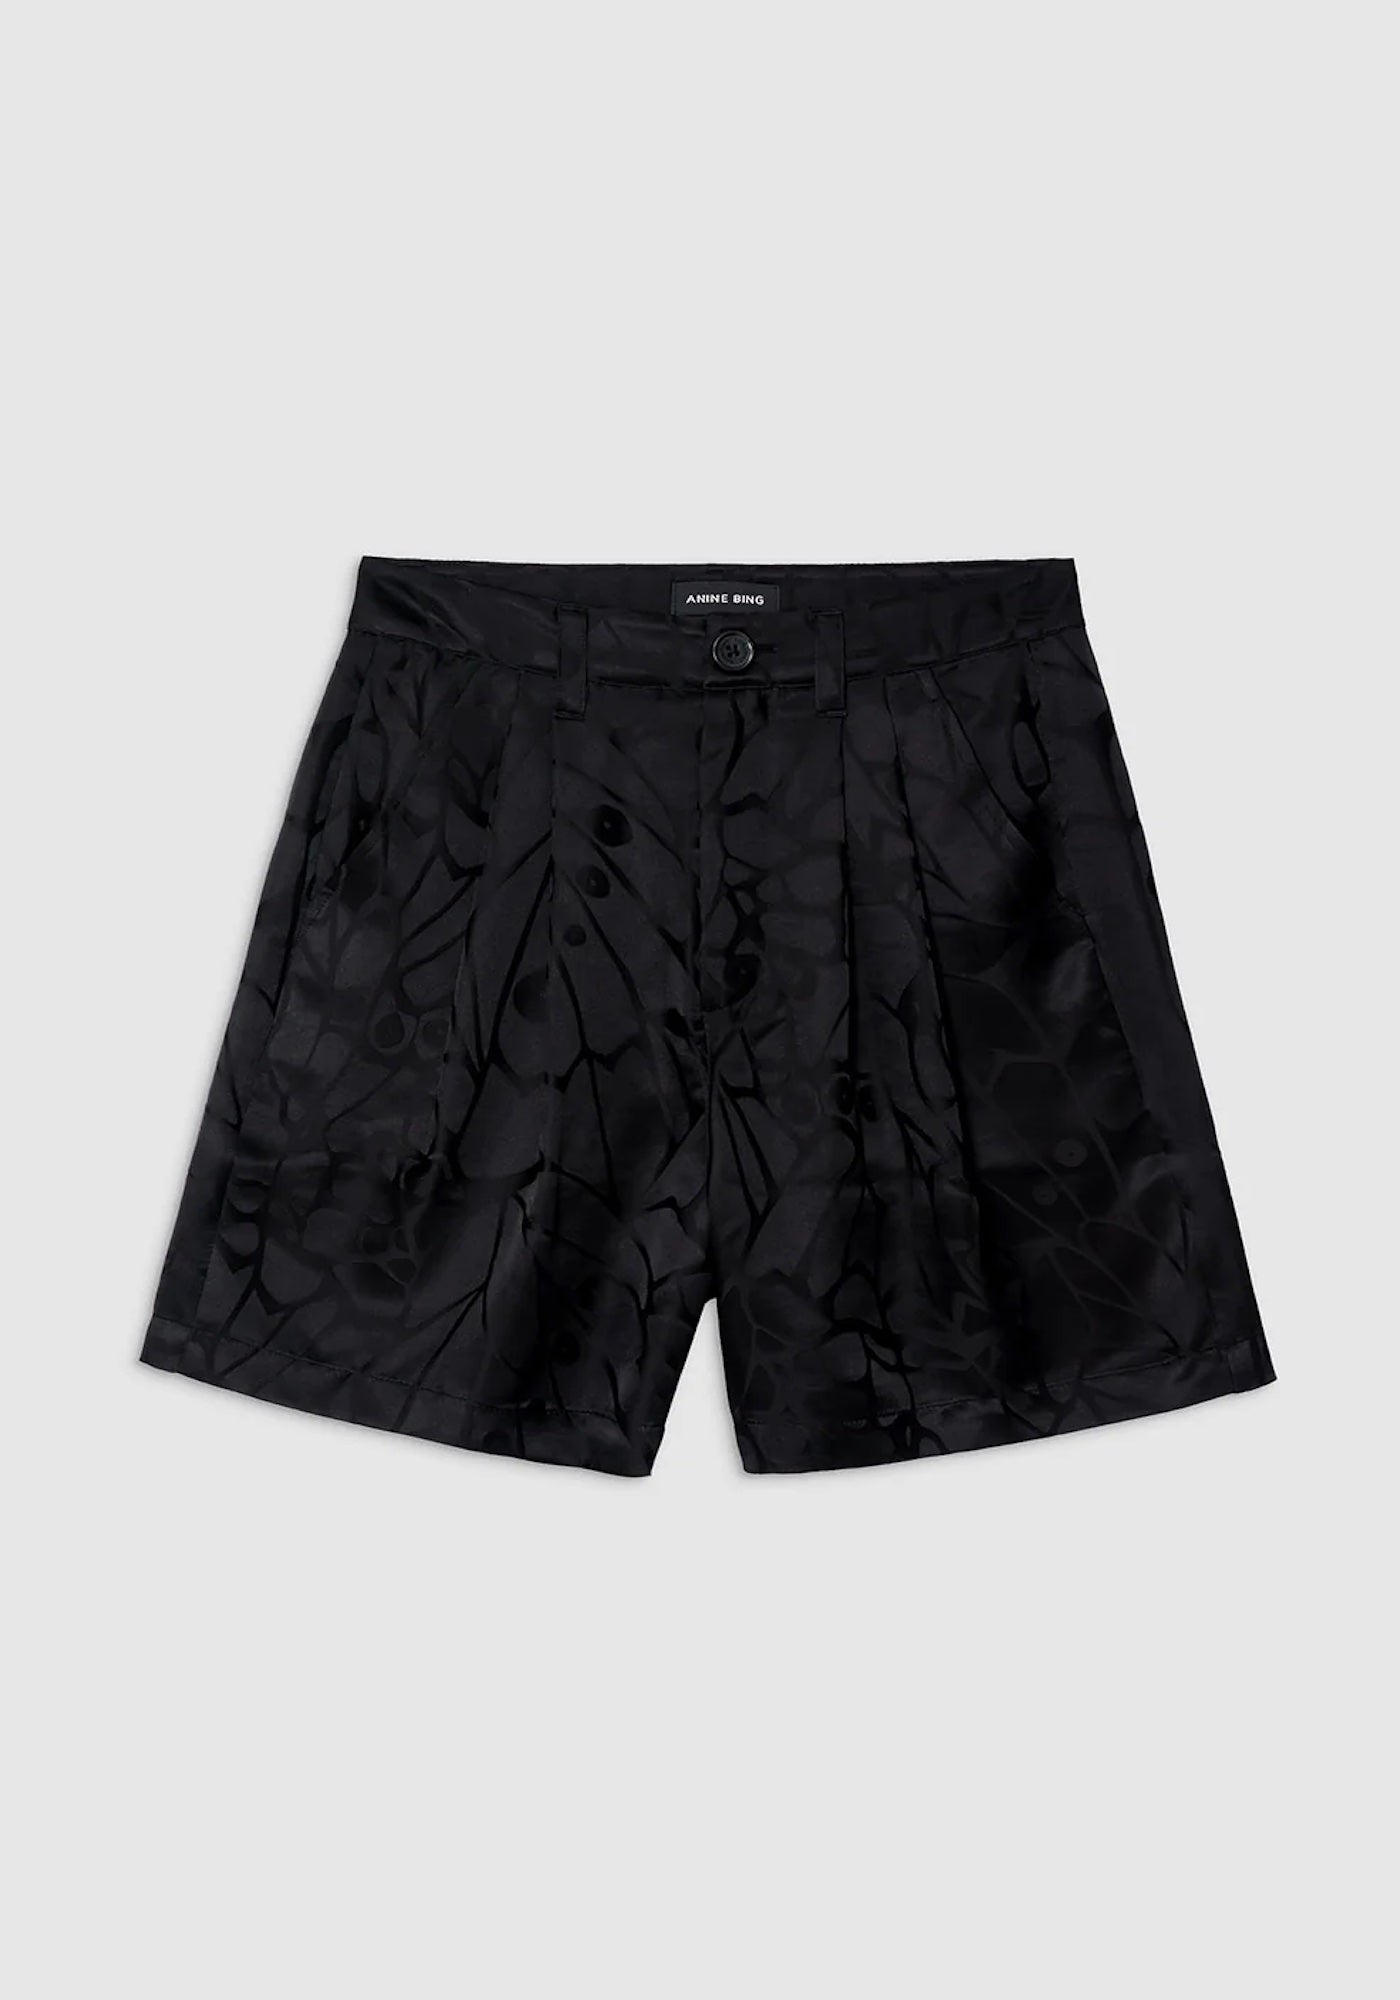 CARRIE SHORT IN BLACK BUTTERFLY JACQUARD